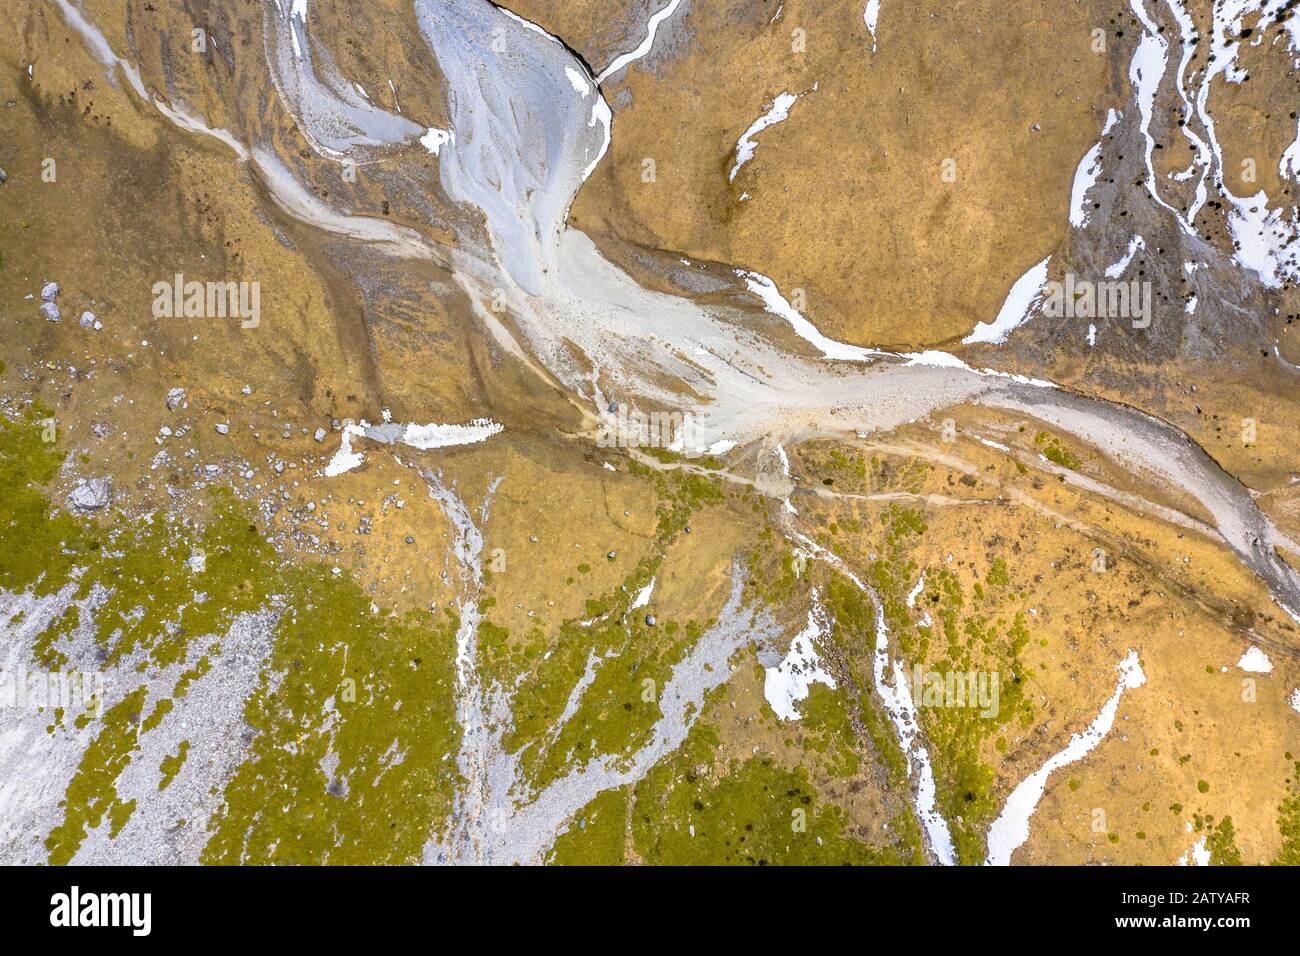 Aerial view of river bed in high mountain alpine region in Ordesa valley, Spanish Pyrenees, Huesca, Aragon, Spain. Stock Photo